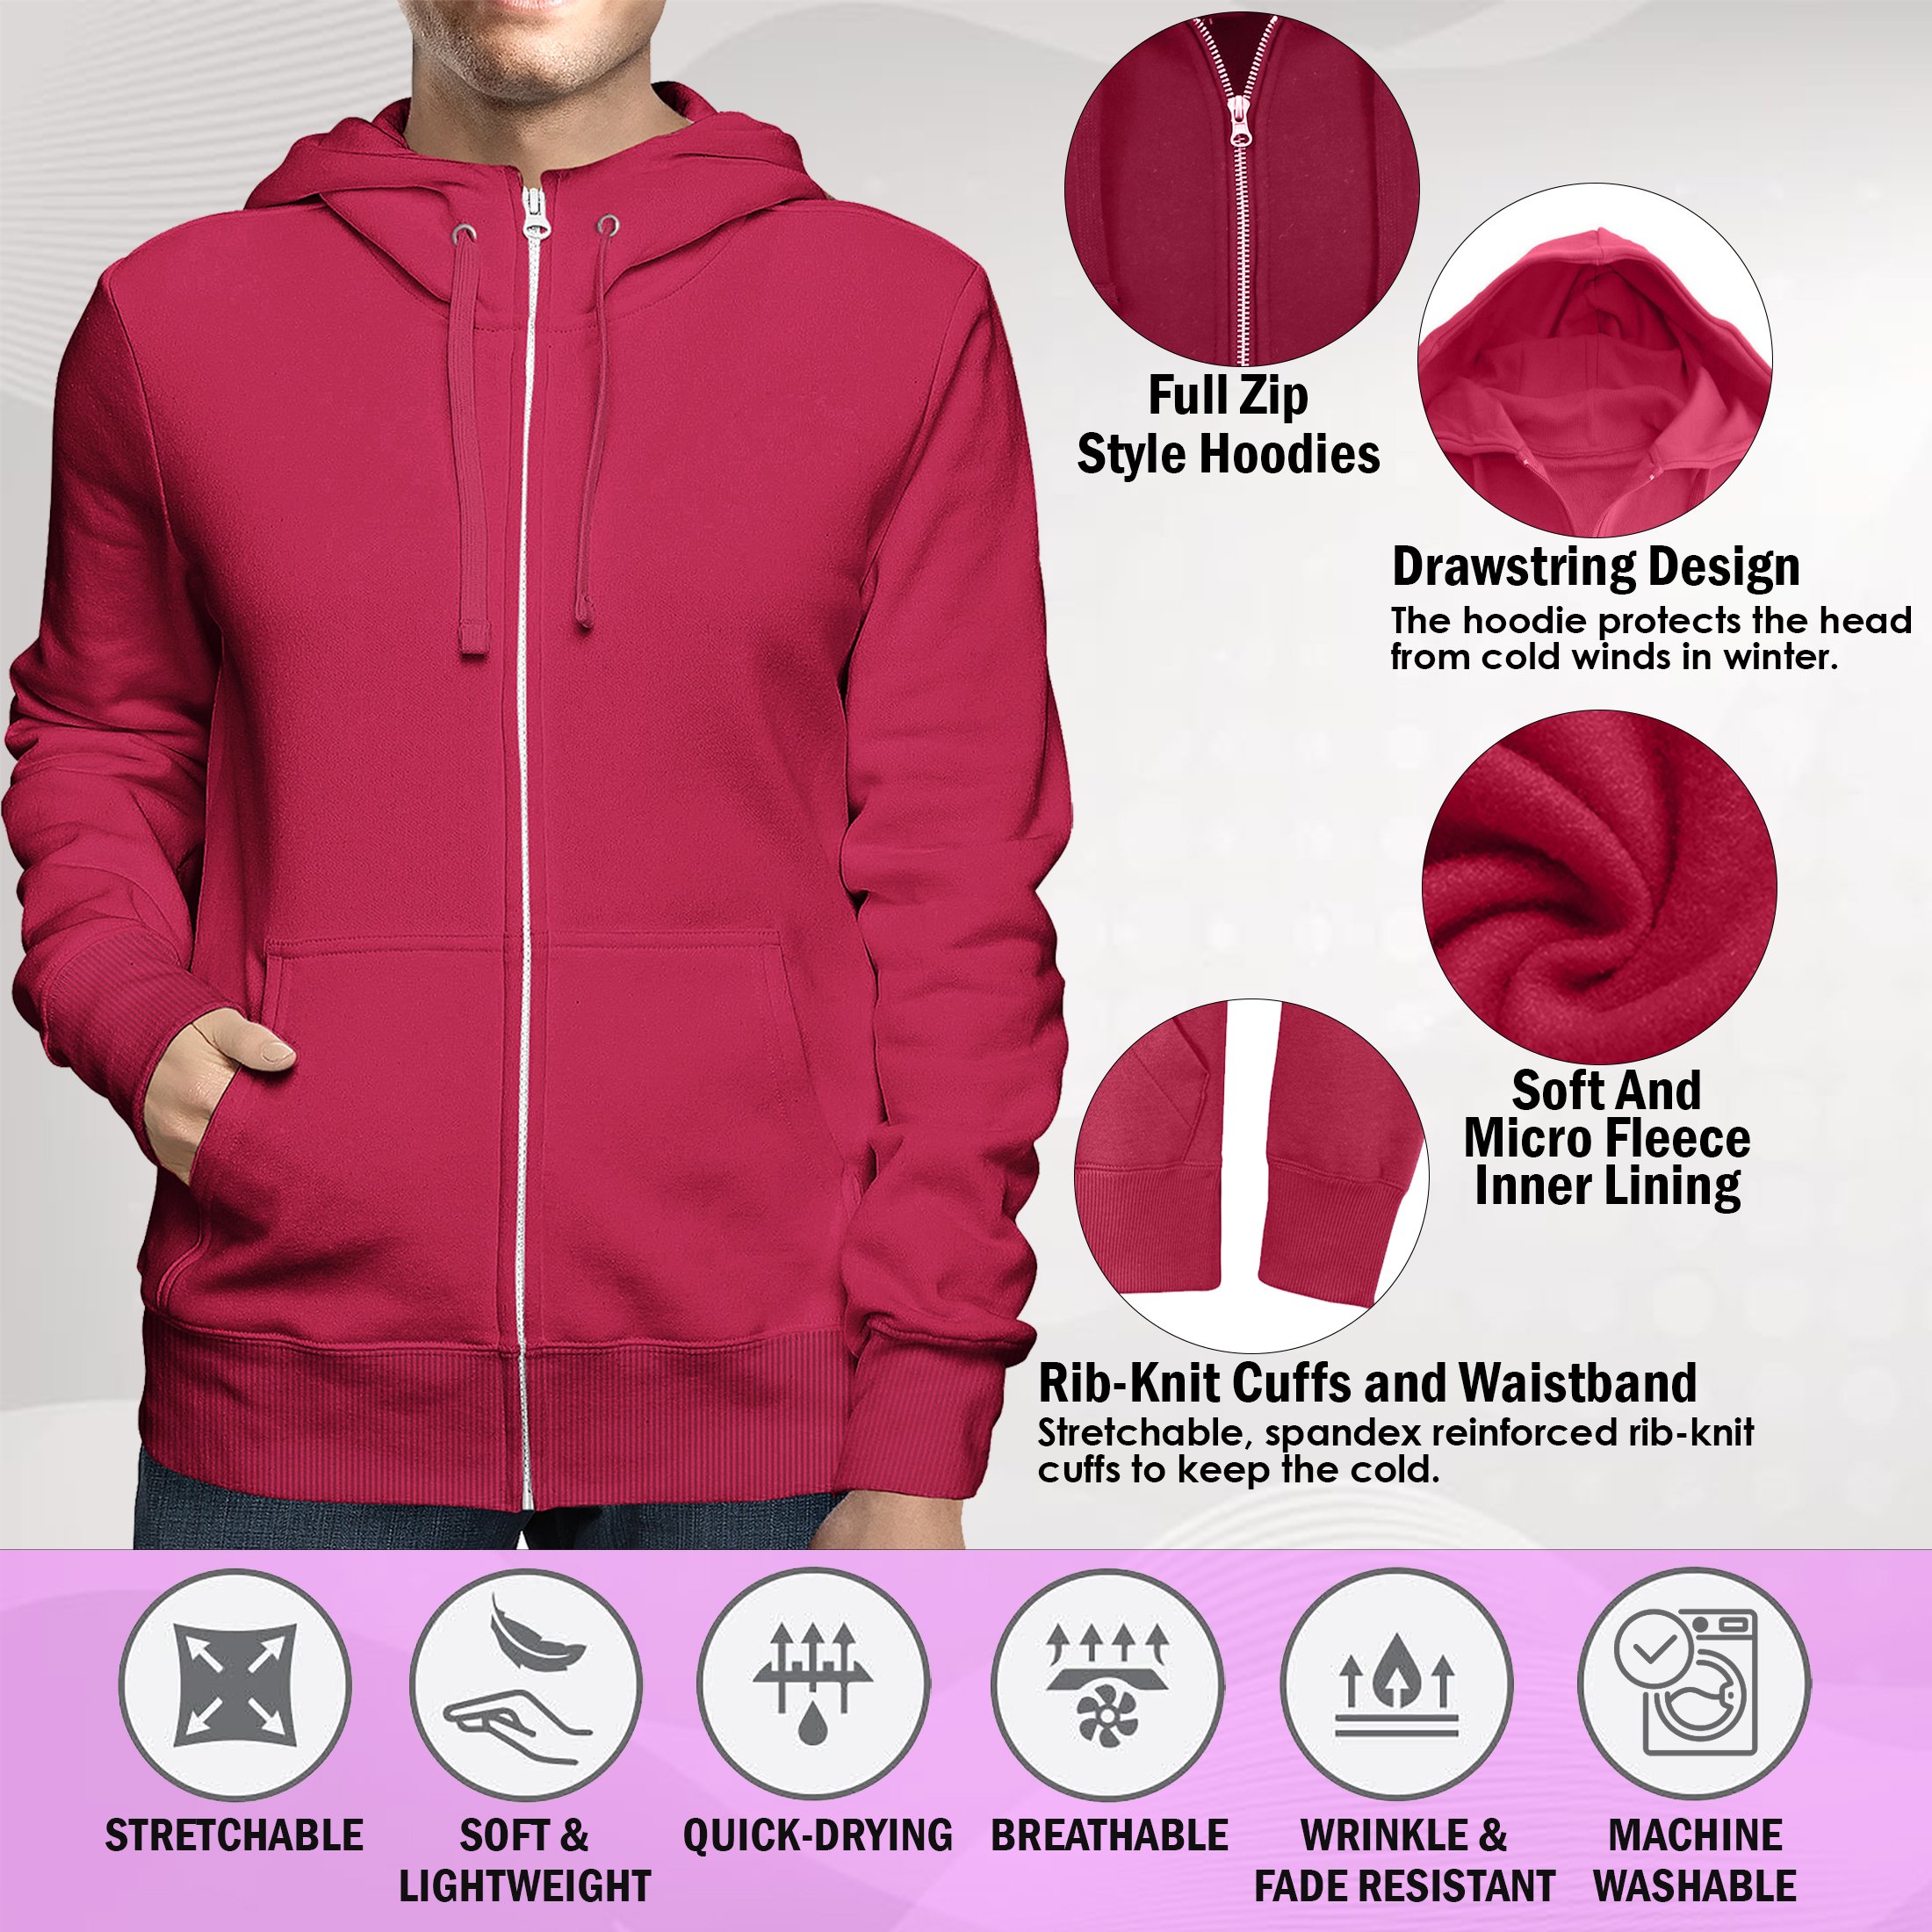 2-Pack: Men's Full Zip Up Fleece-Lined Hoodie Sweatshirt (Big & Tall Size Available) - Burgundy & Olive, 2x-large